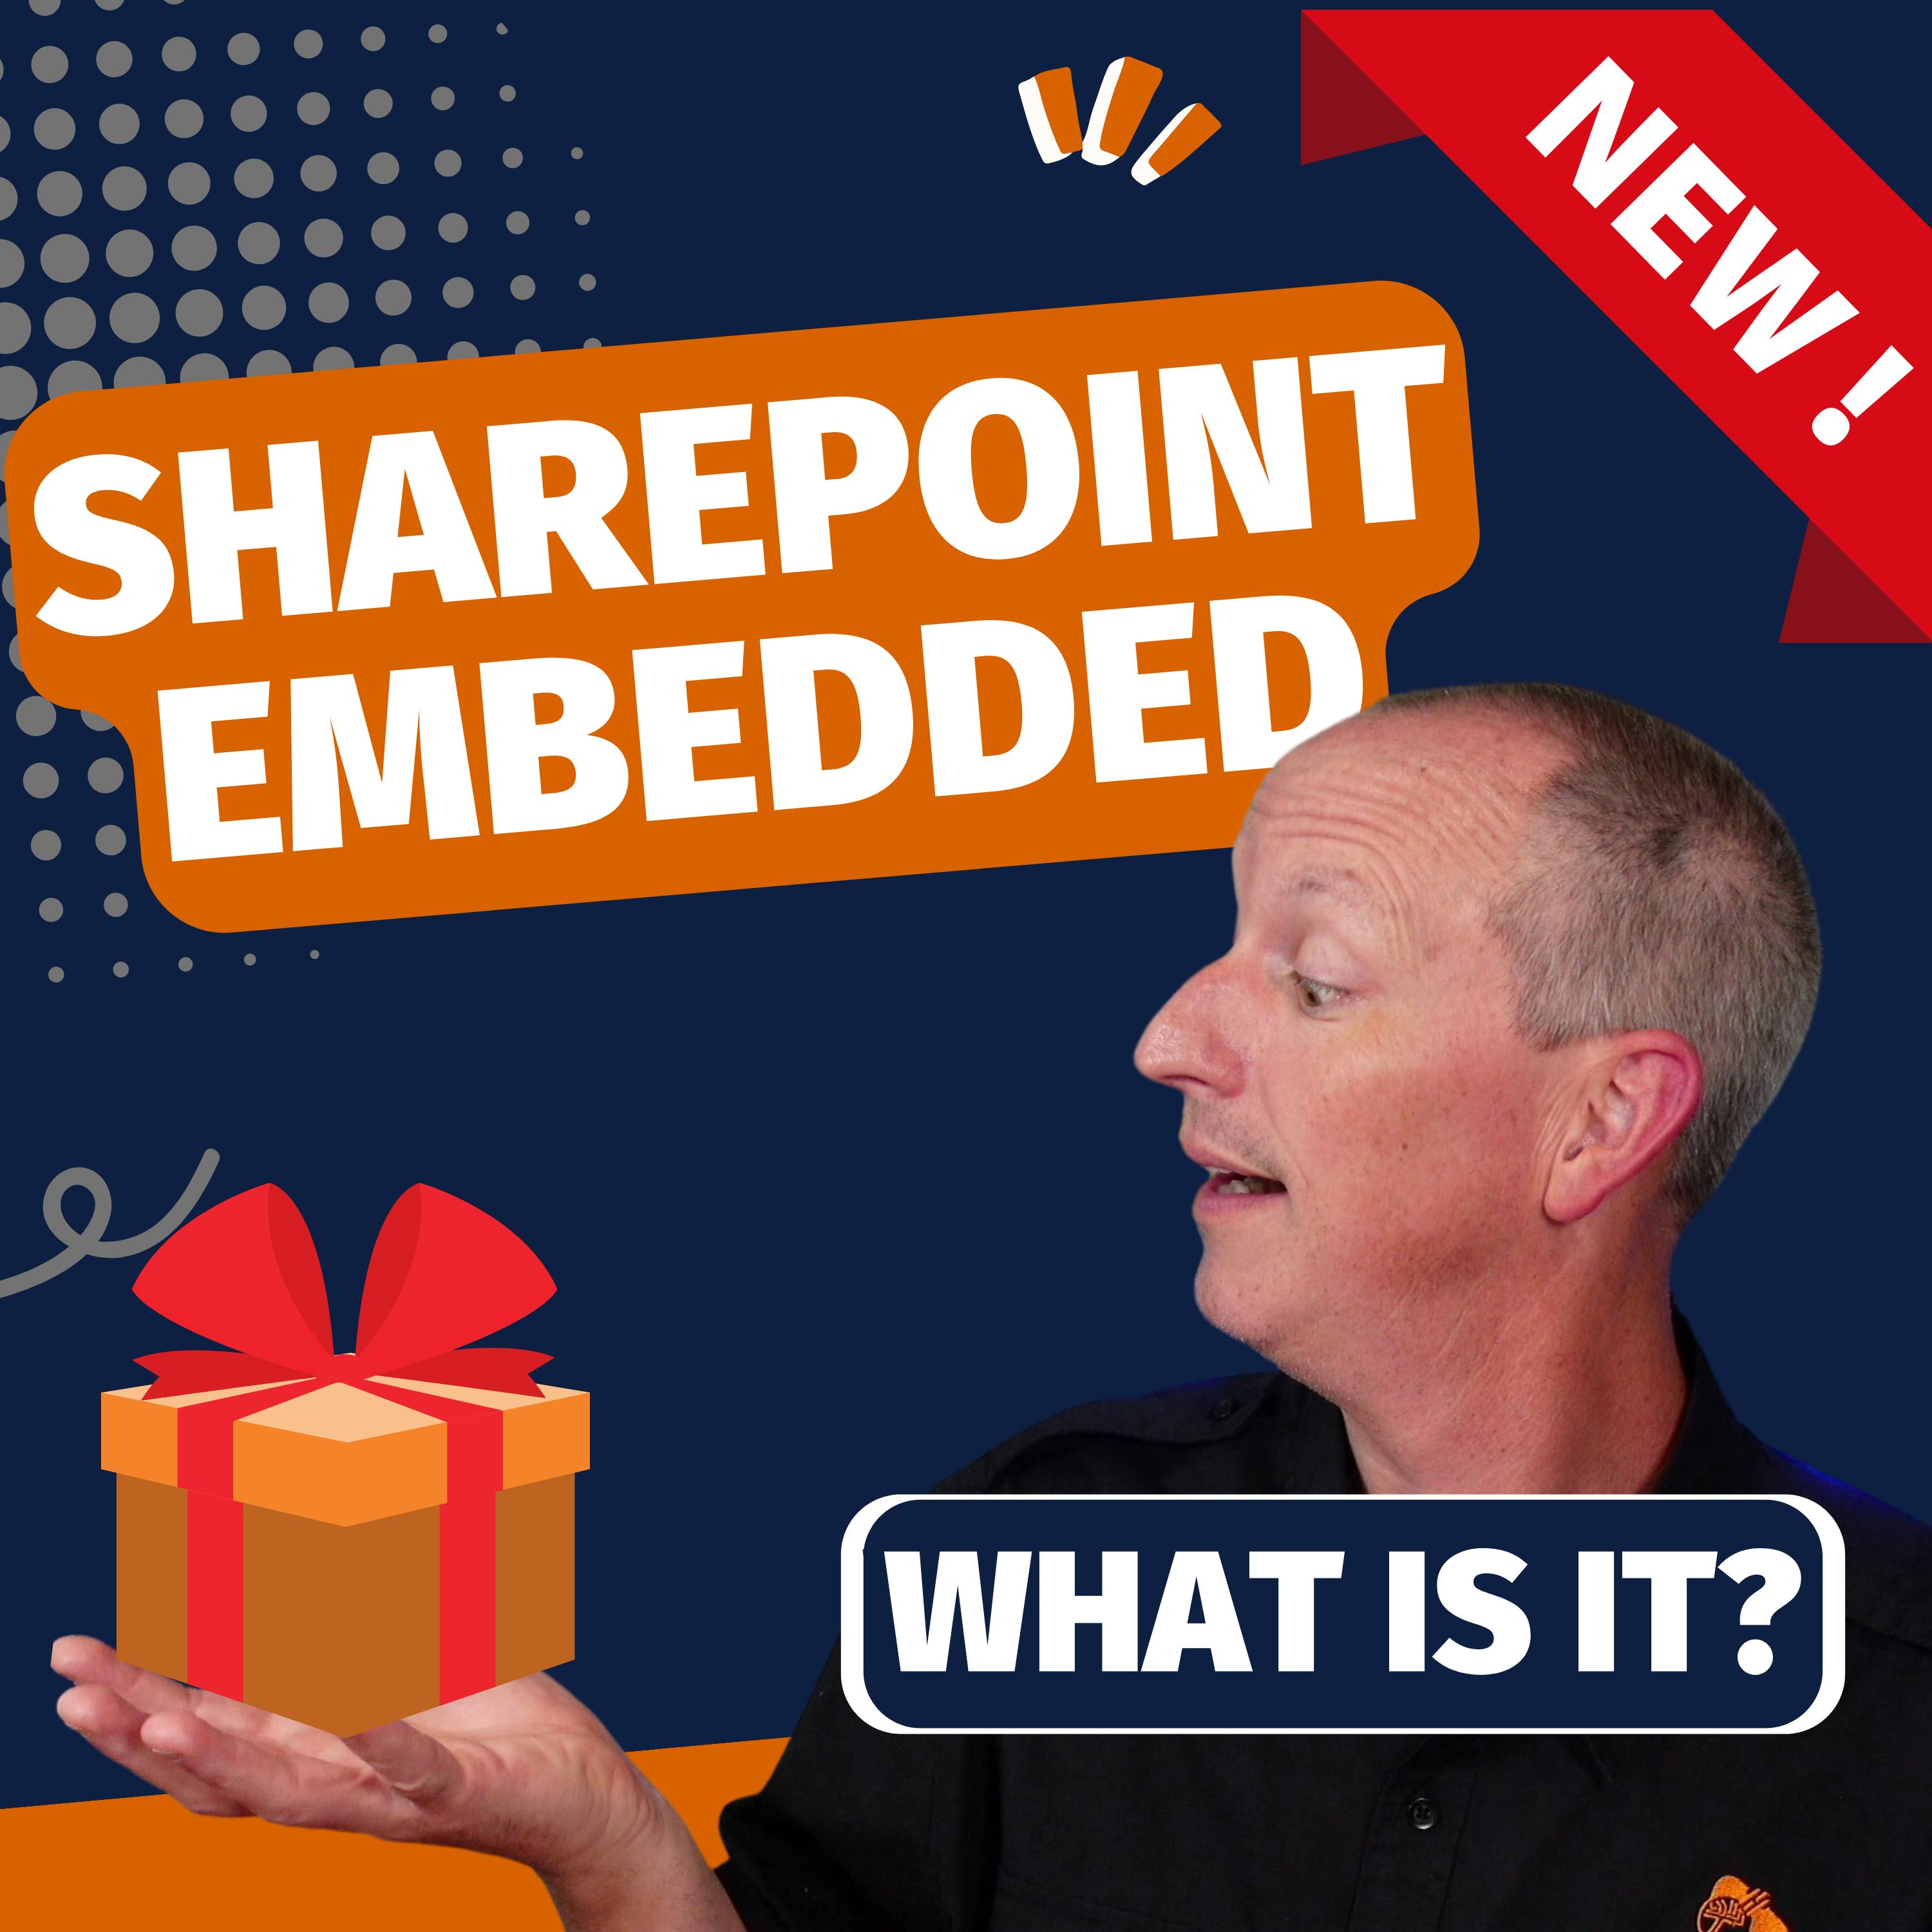 What is SharePoint Embedded?